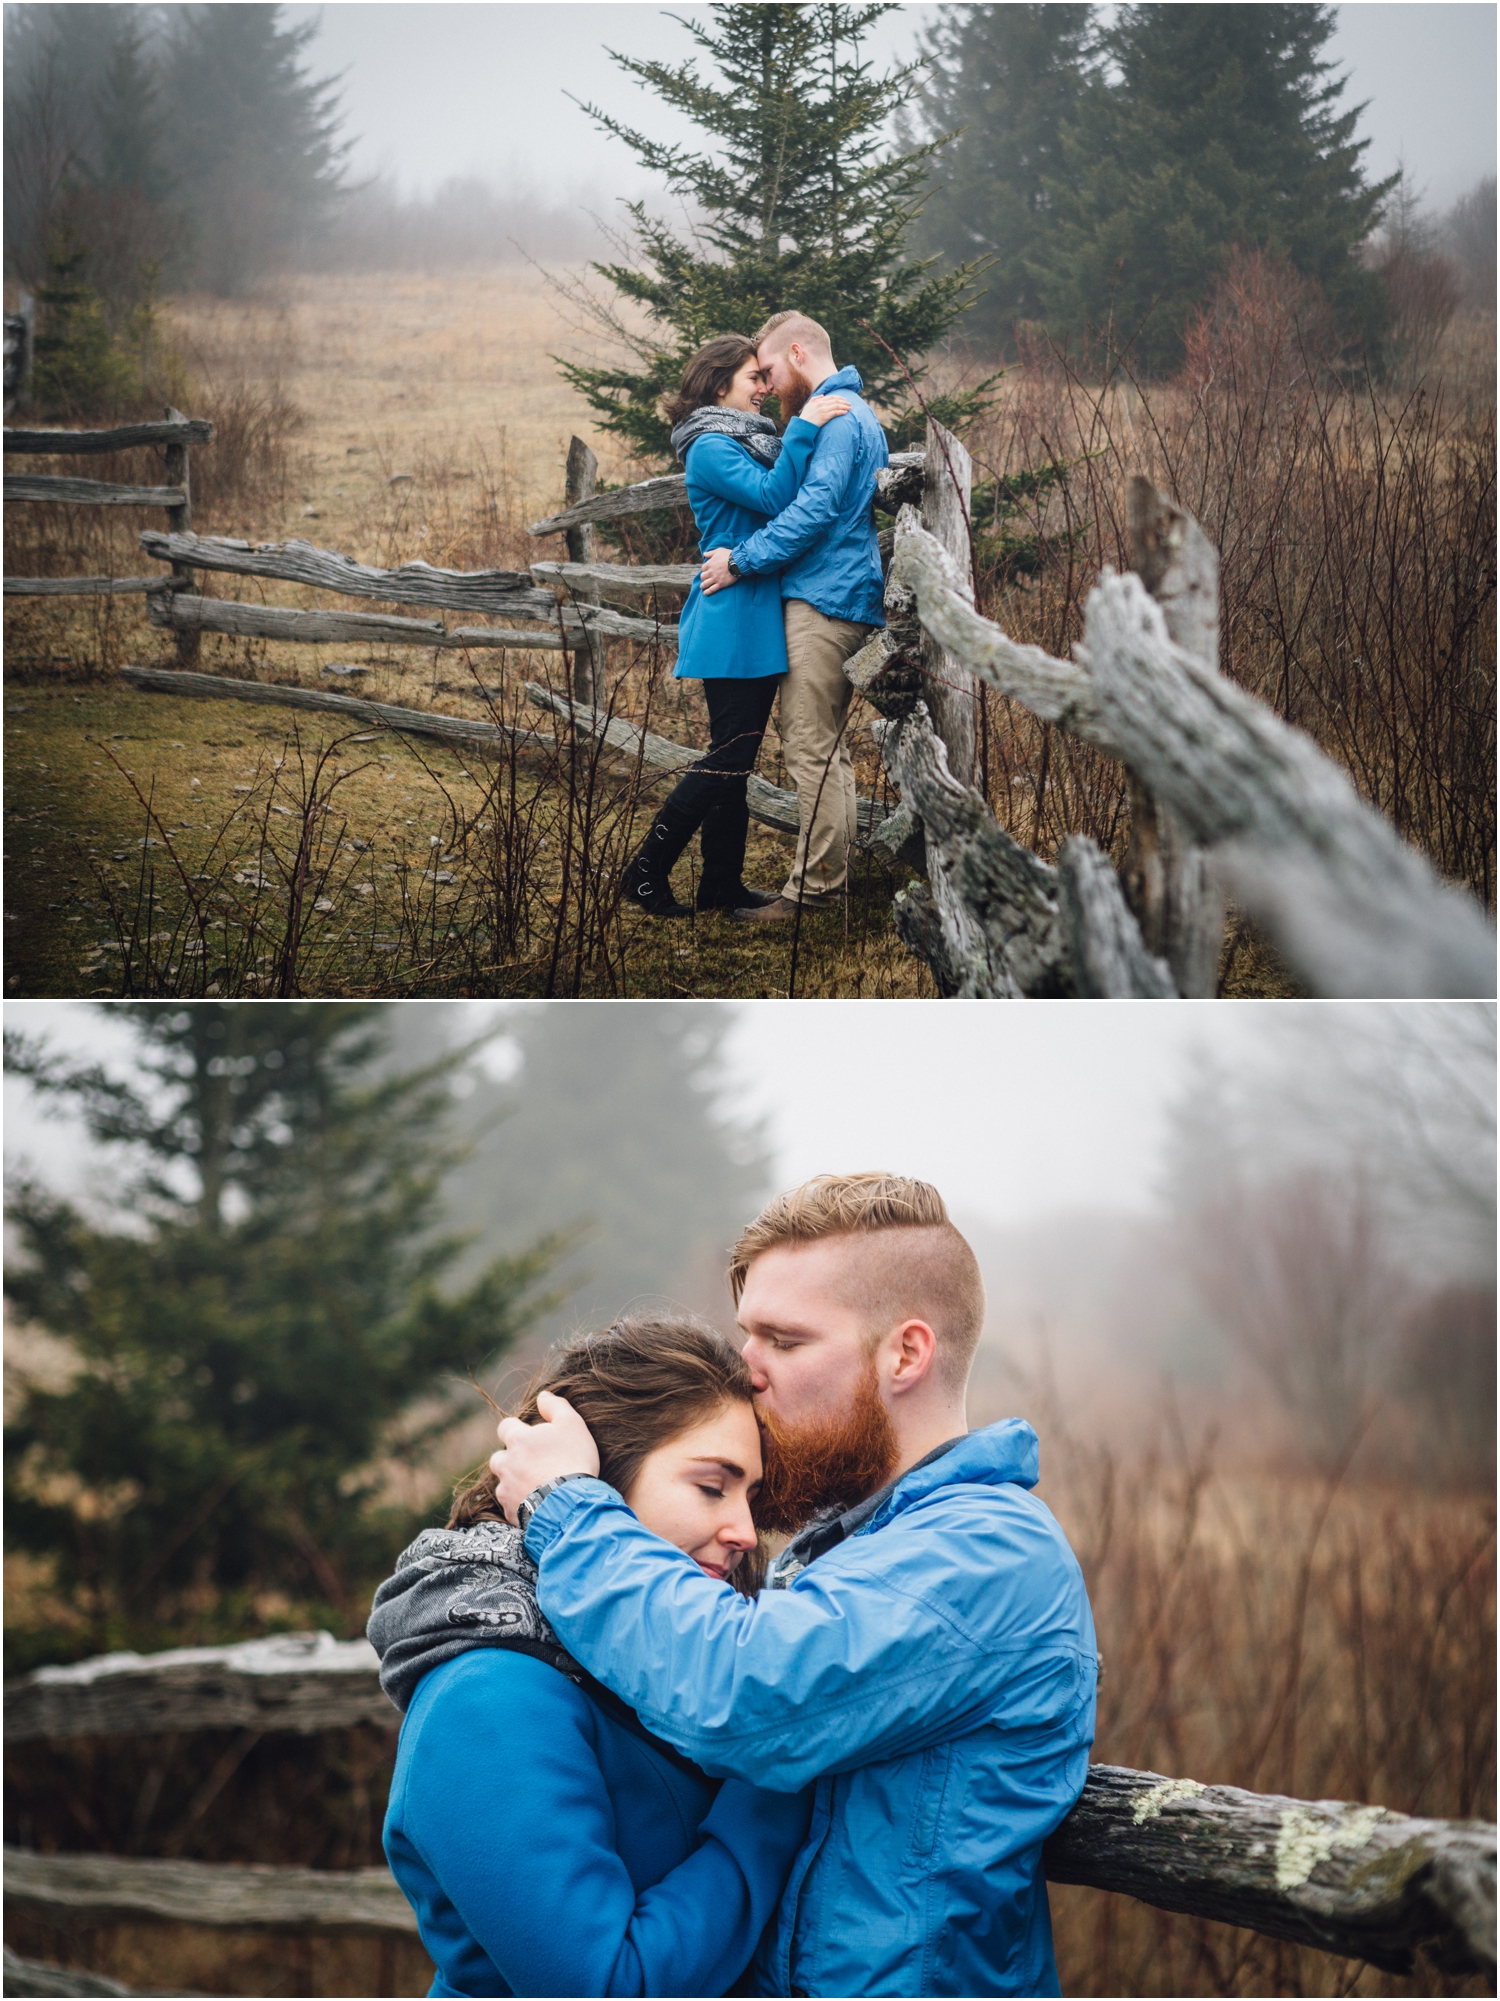 katy-sergent-photography-grayson-highlands-engagement-session-mouth-of-wilson-virginia-damascus-appalachian-trail-tennessee-wedding-elopement_0010.jpg